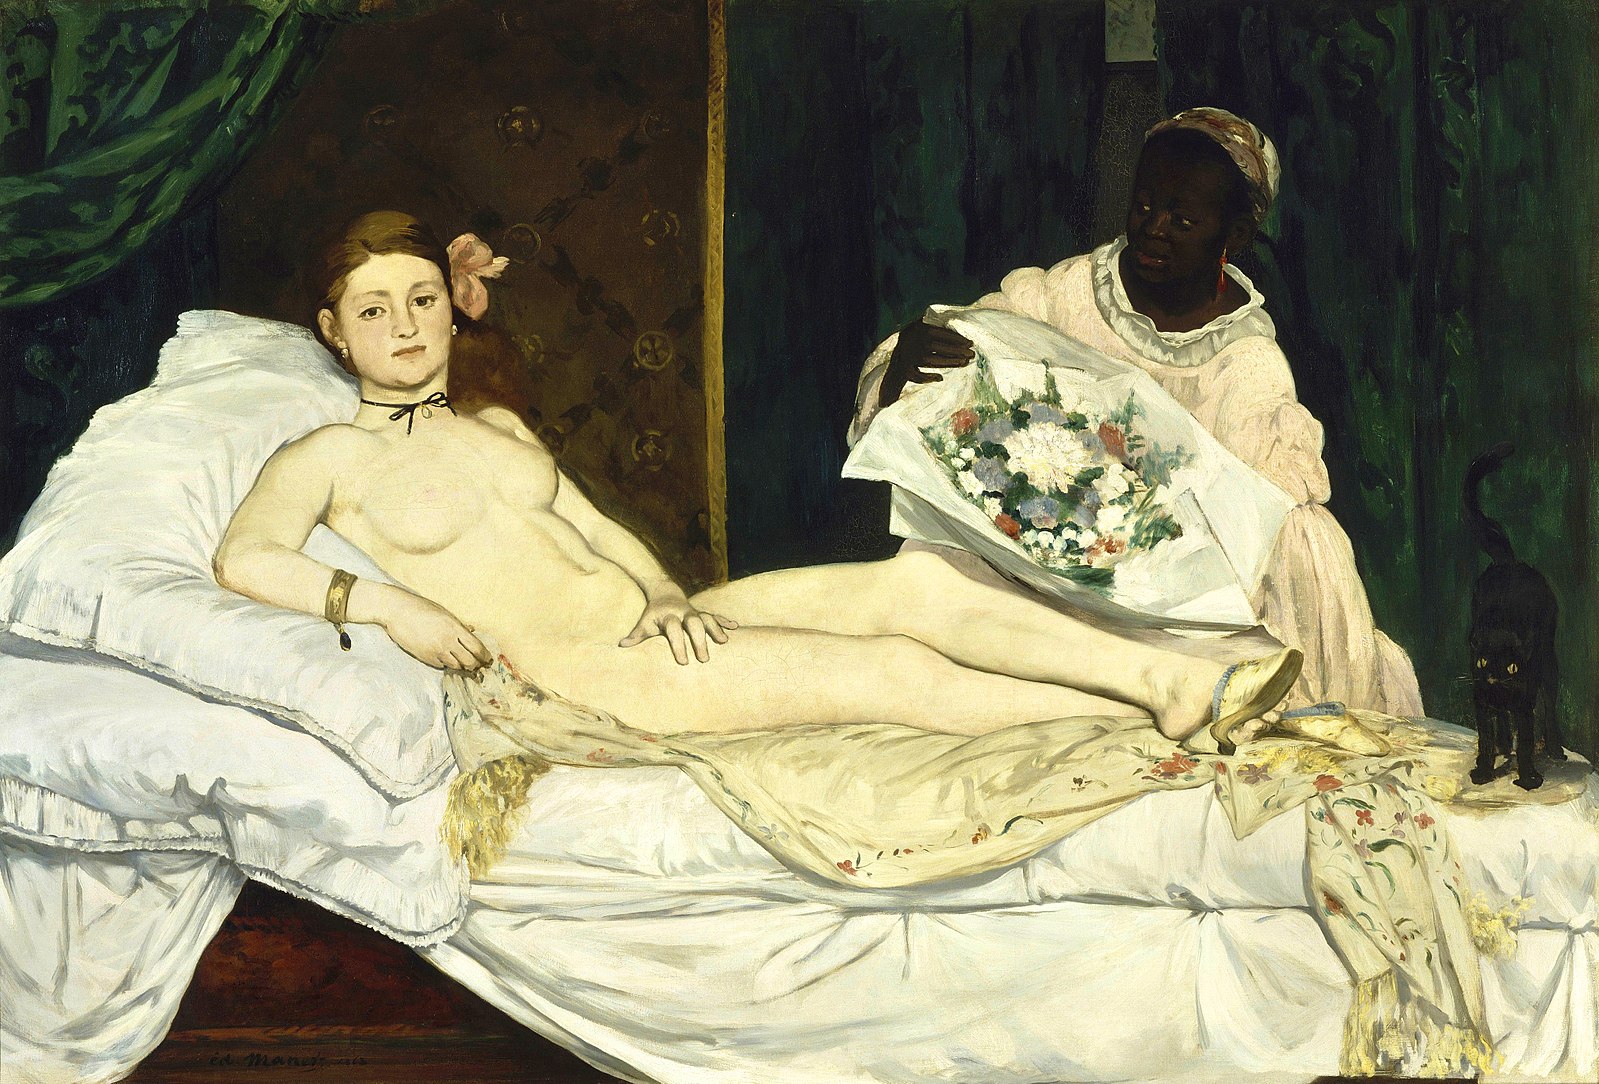 A nude women laying on a bed with a black cat and a servant bringing her flowers